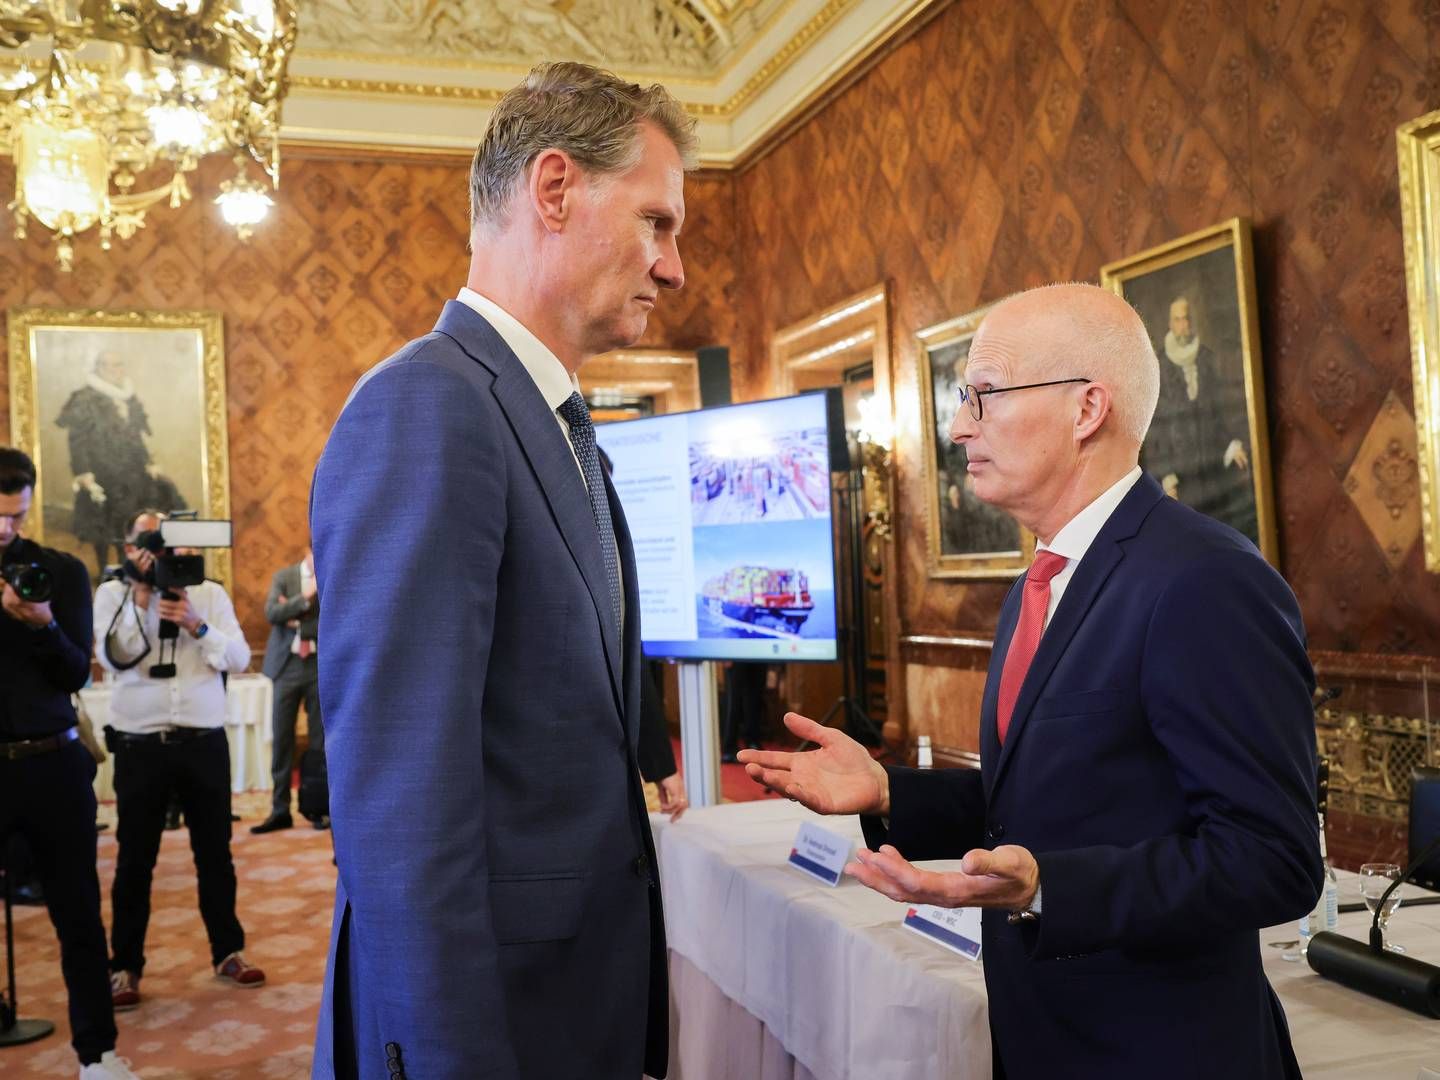 MSC's CEO, Søren Toft (left), and Hamburg's mayor, Peter Tschentscher, when the deal on MSC's entry into HHLA was announced on Sept. 13. | Photo: Christian Charisius/AP/Ritzau Scanpix